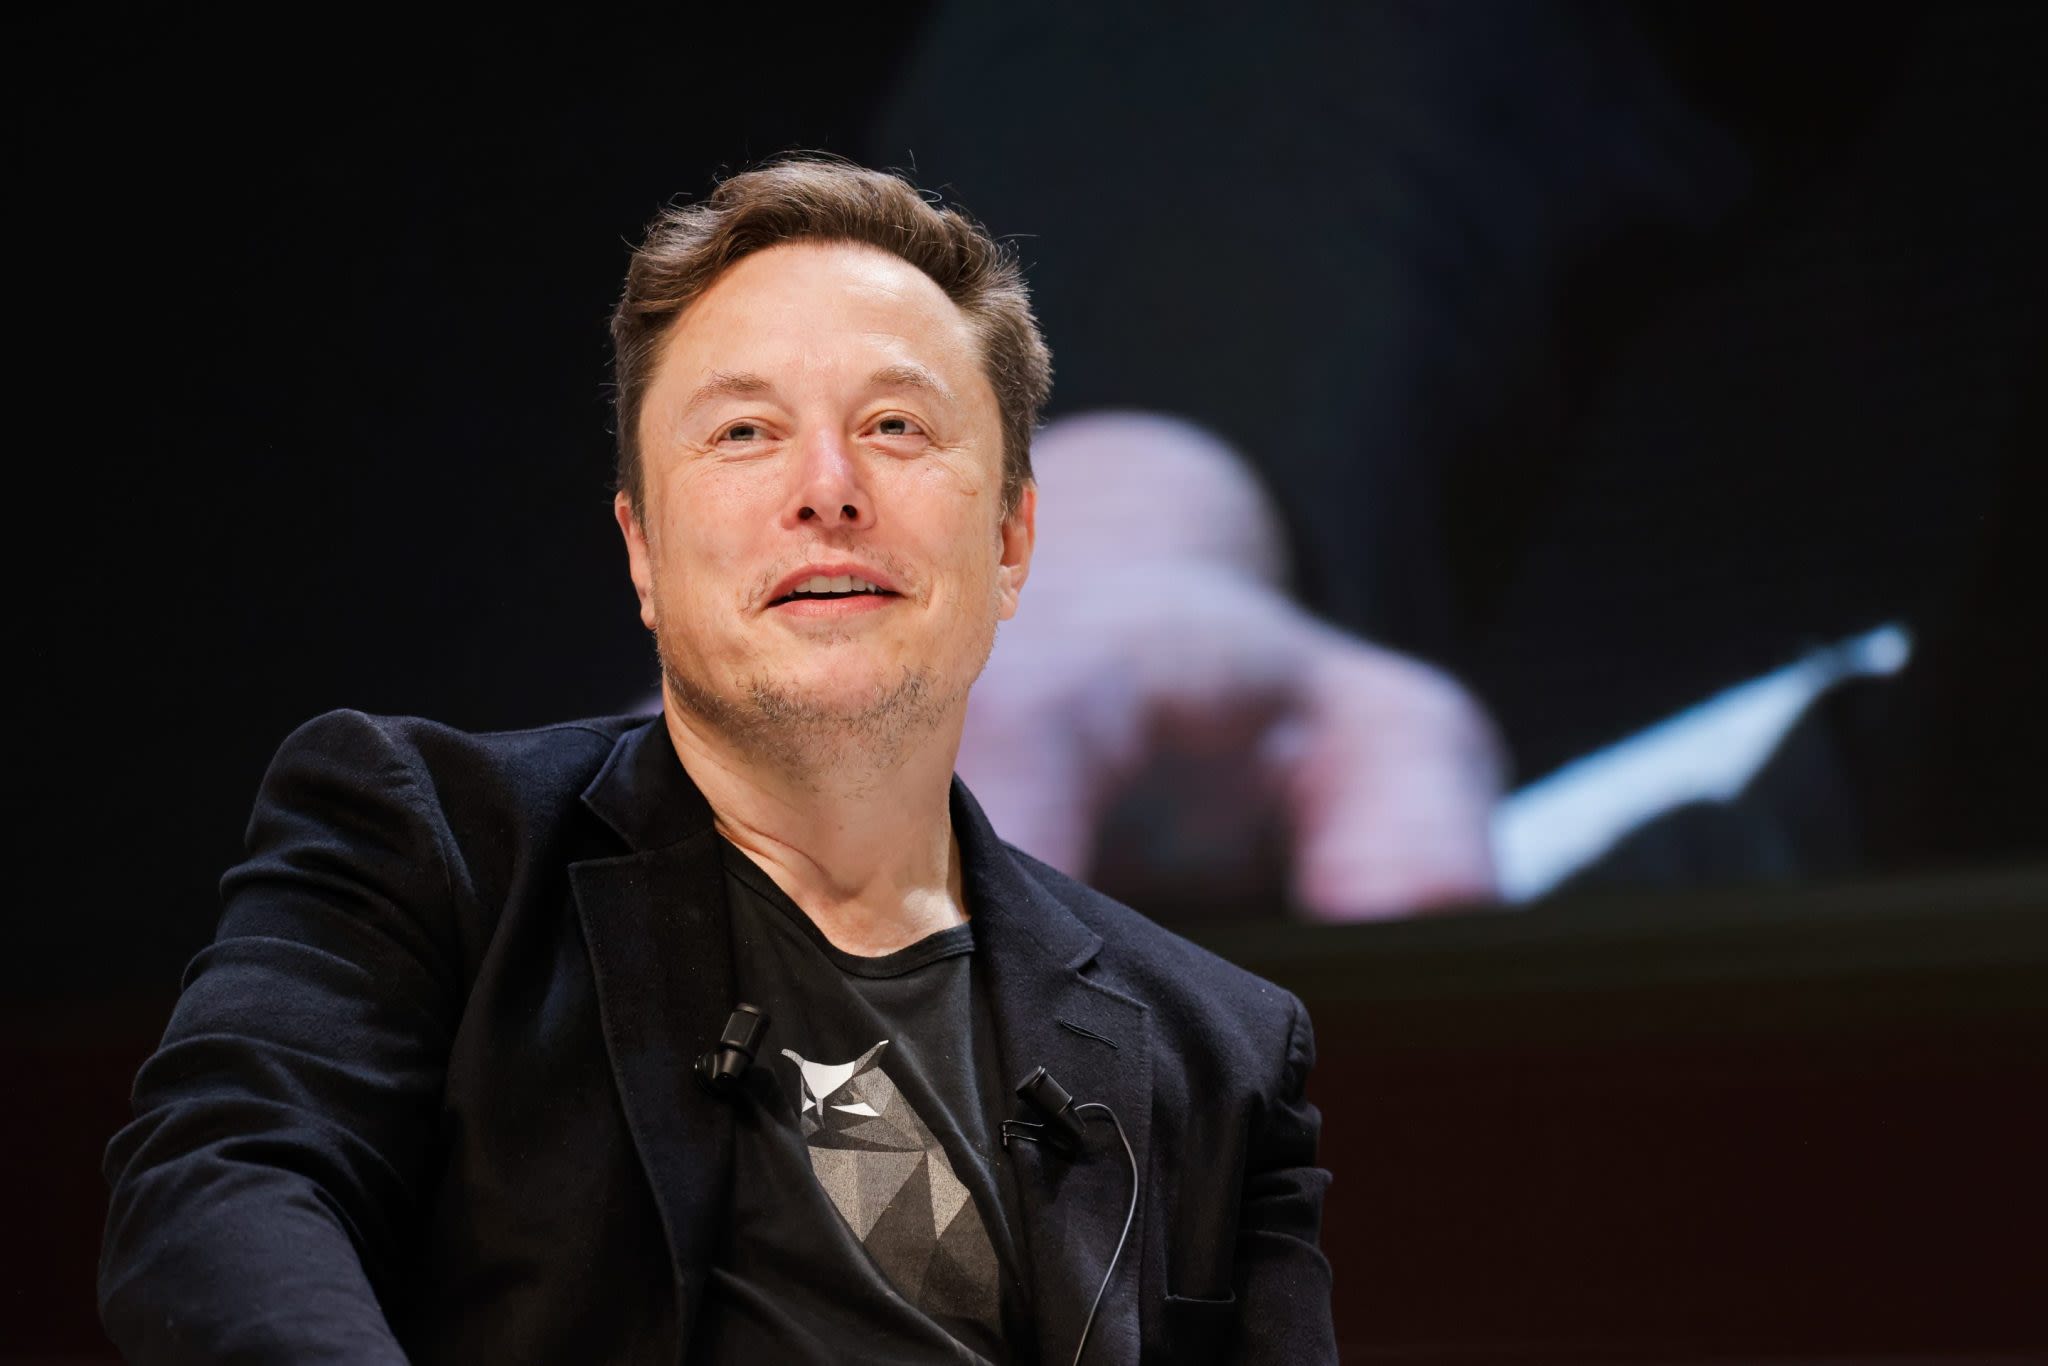 Elon Musk’s Tesla recoups all its year-to-date losses after adding a staggering $150bn in market cap in just 3 days: ‘Worst is in the rear view mirror’